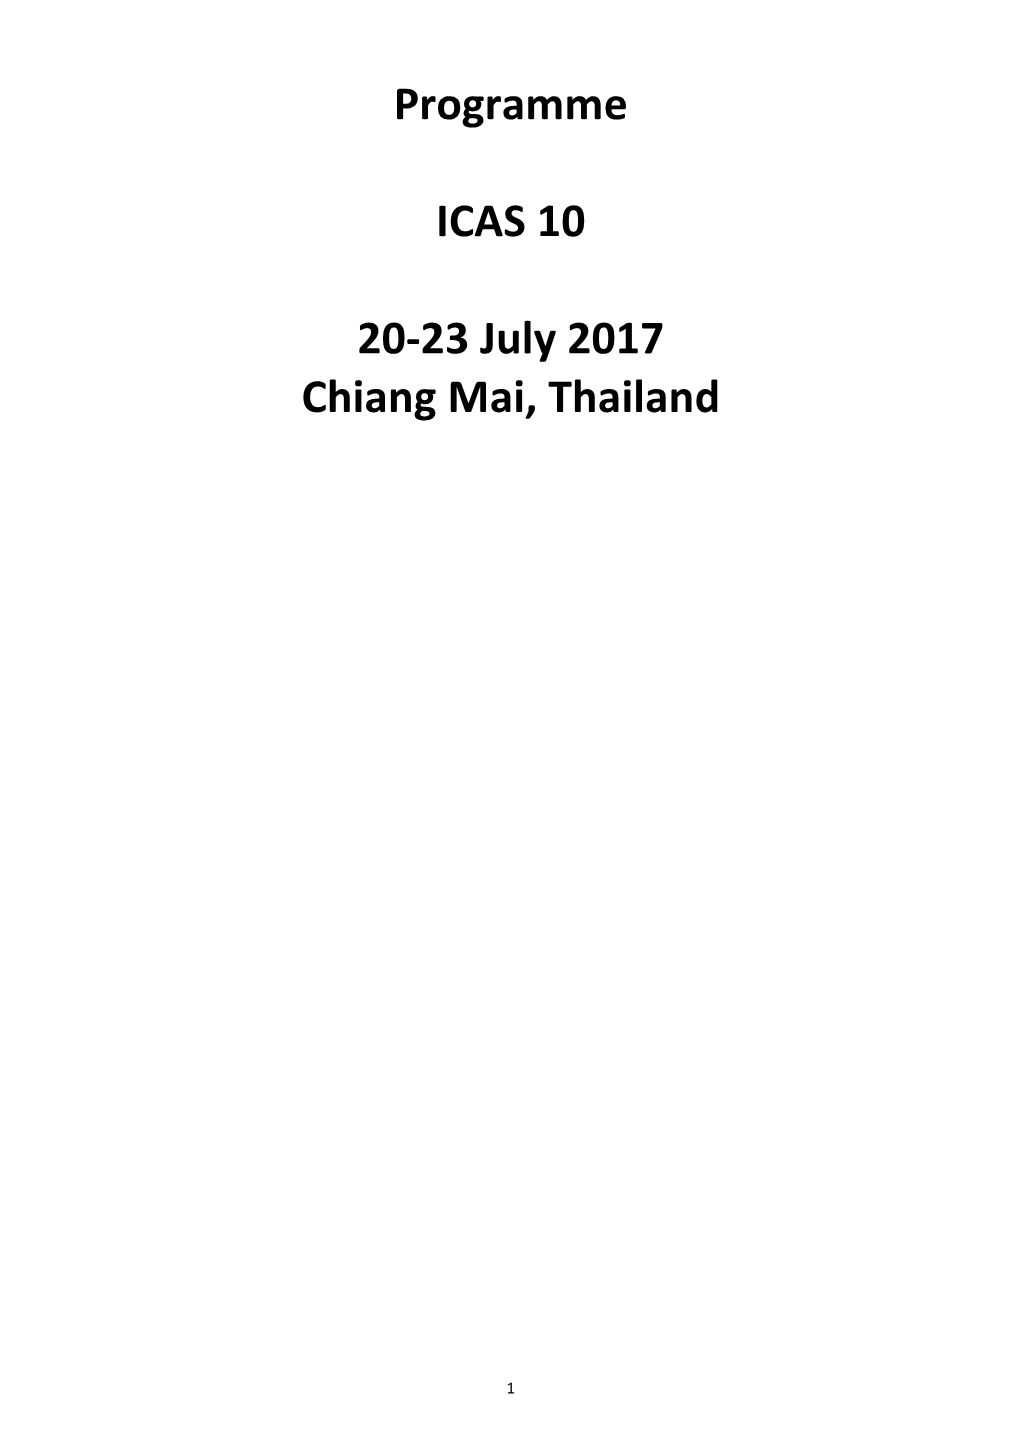 Programme ICAS 10 20-23 July 2017 Chiang Mai, Thailand